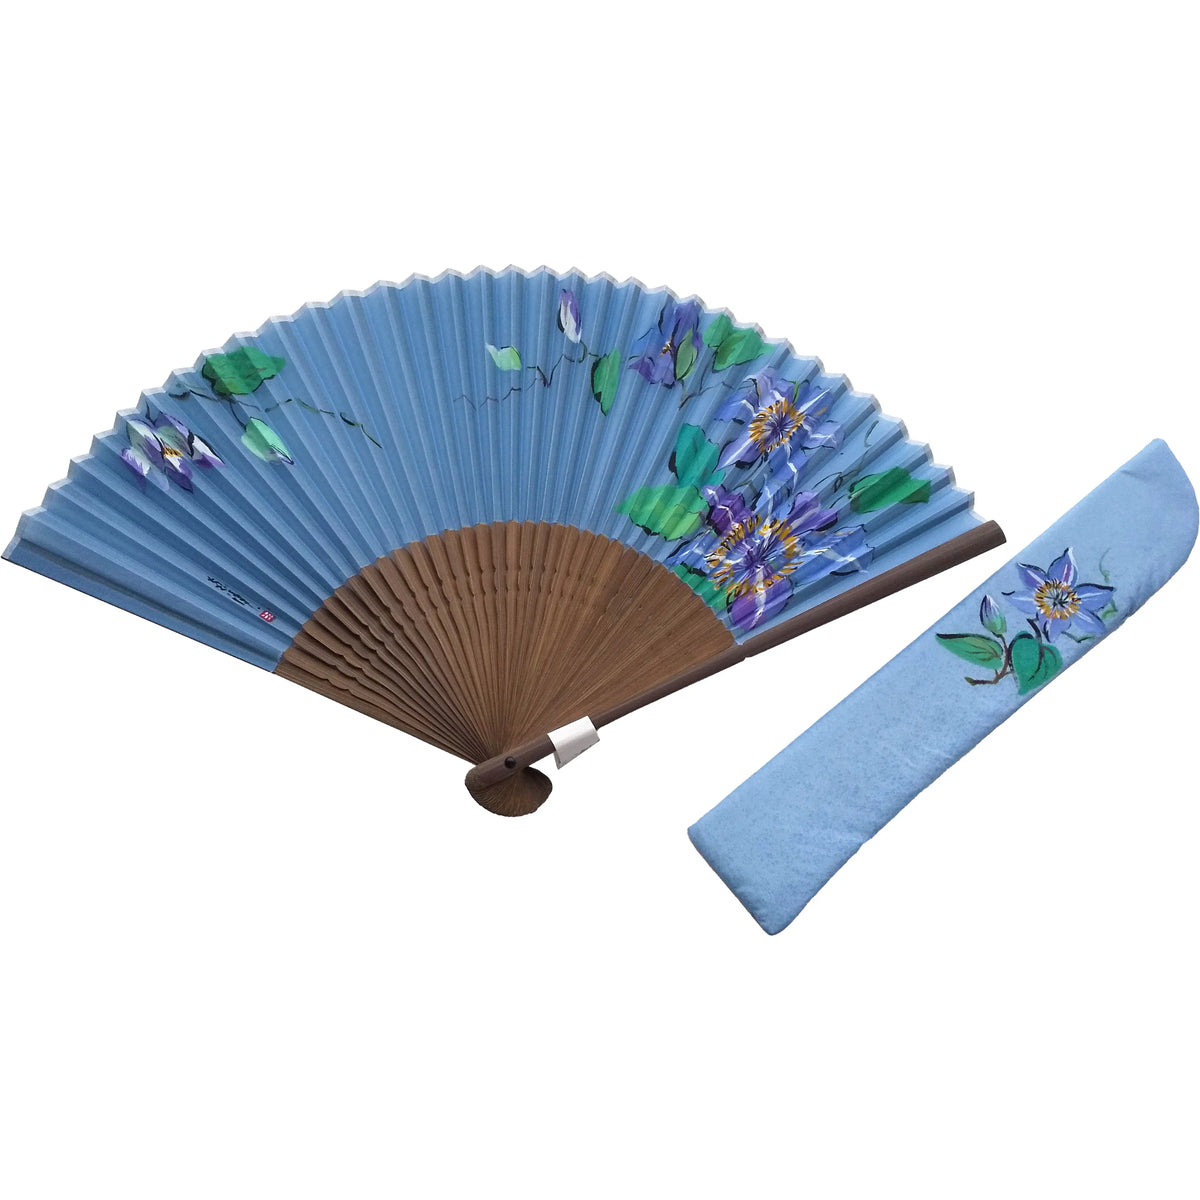 Silk fan, dewdrop grass color, with iron wire (clematis) illustration, one of a kind, in paulownia box